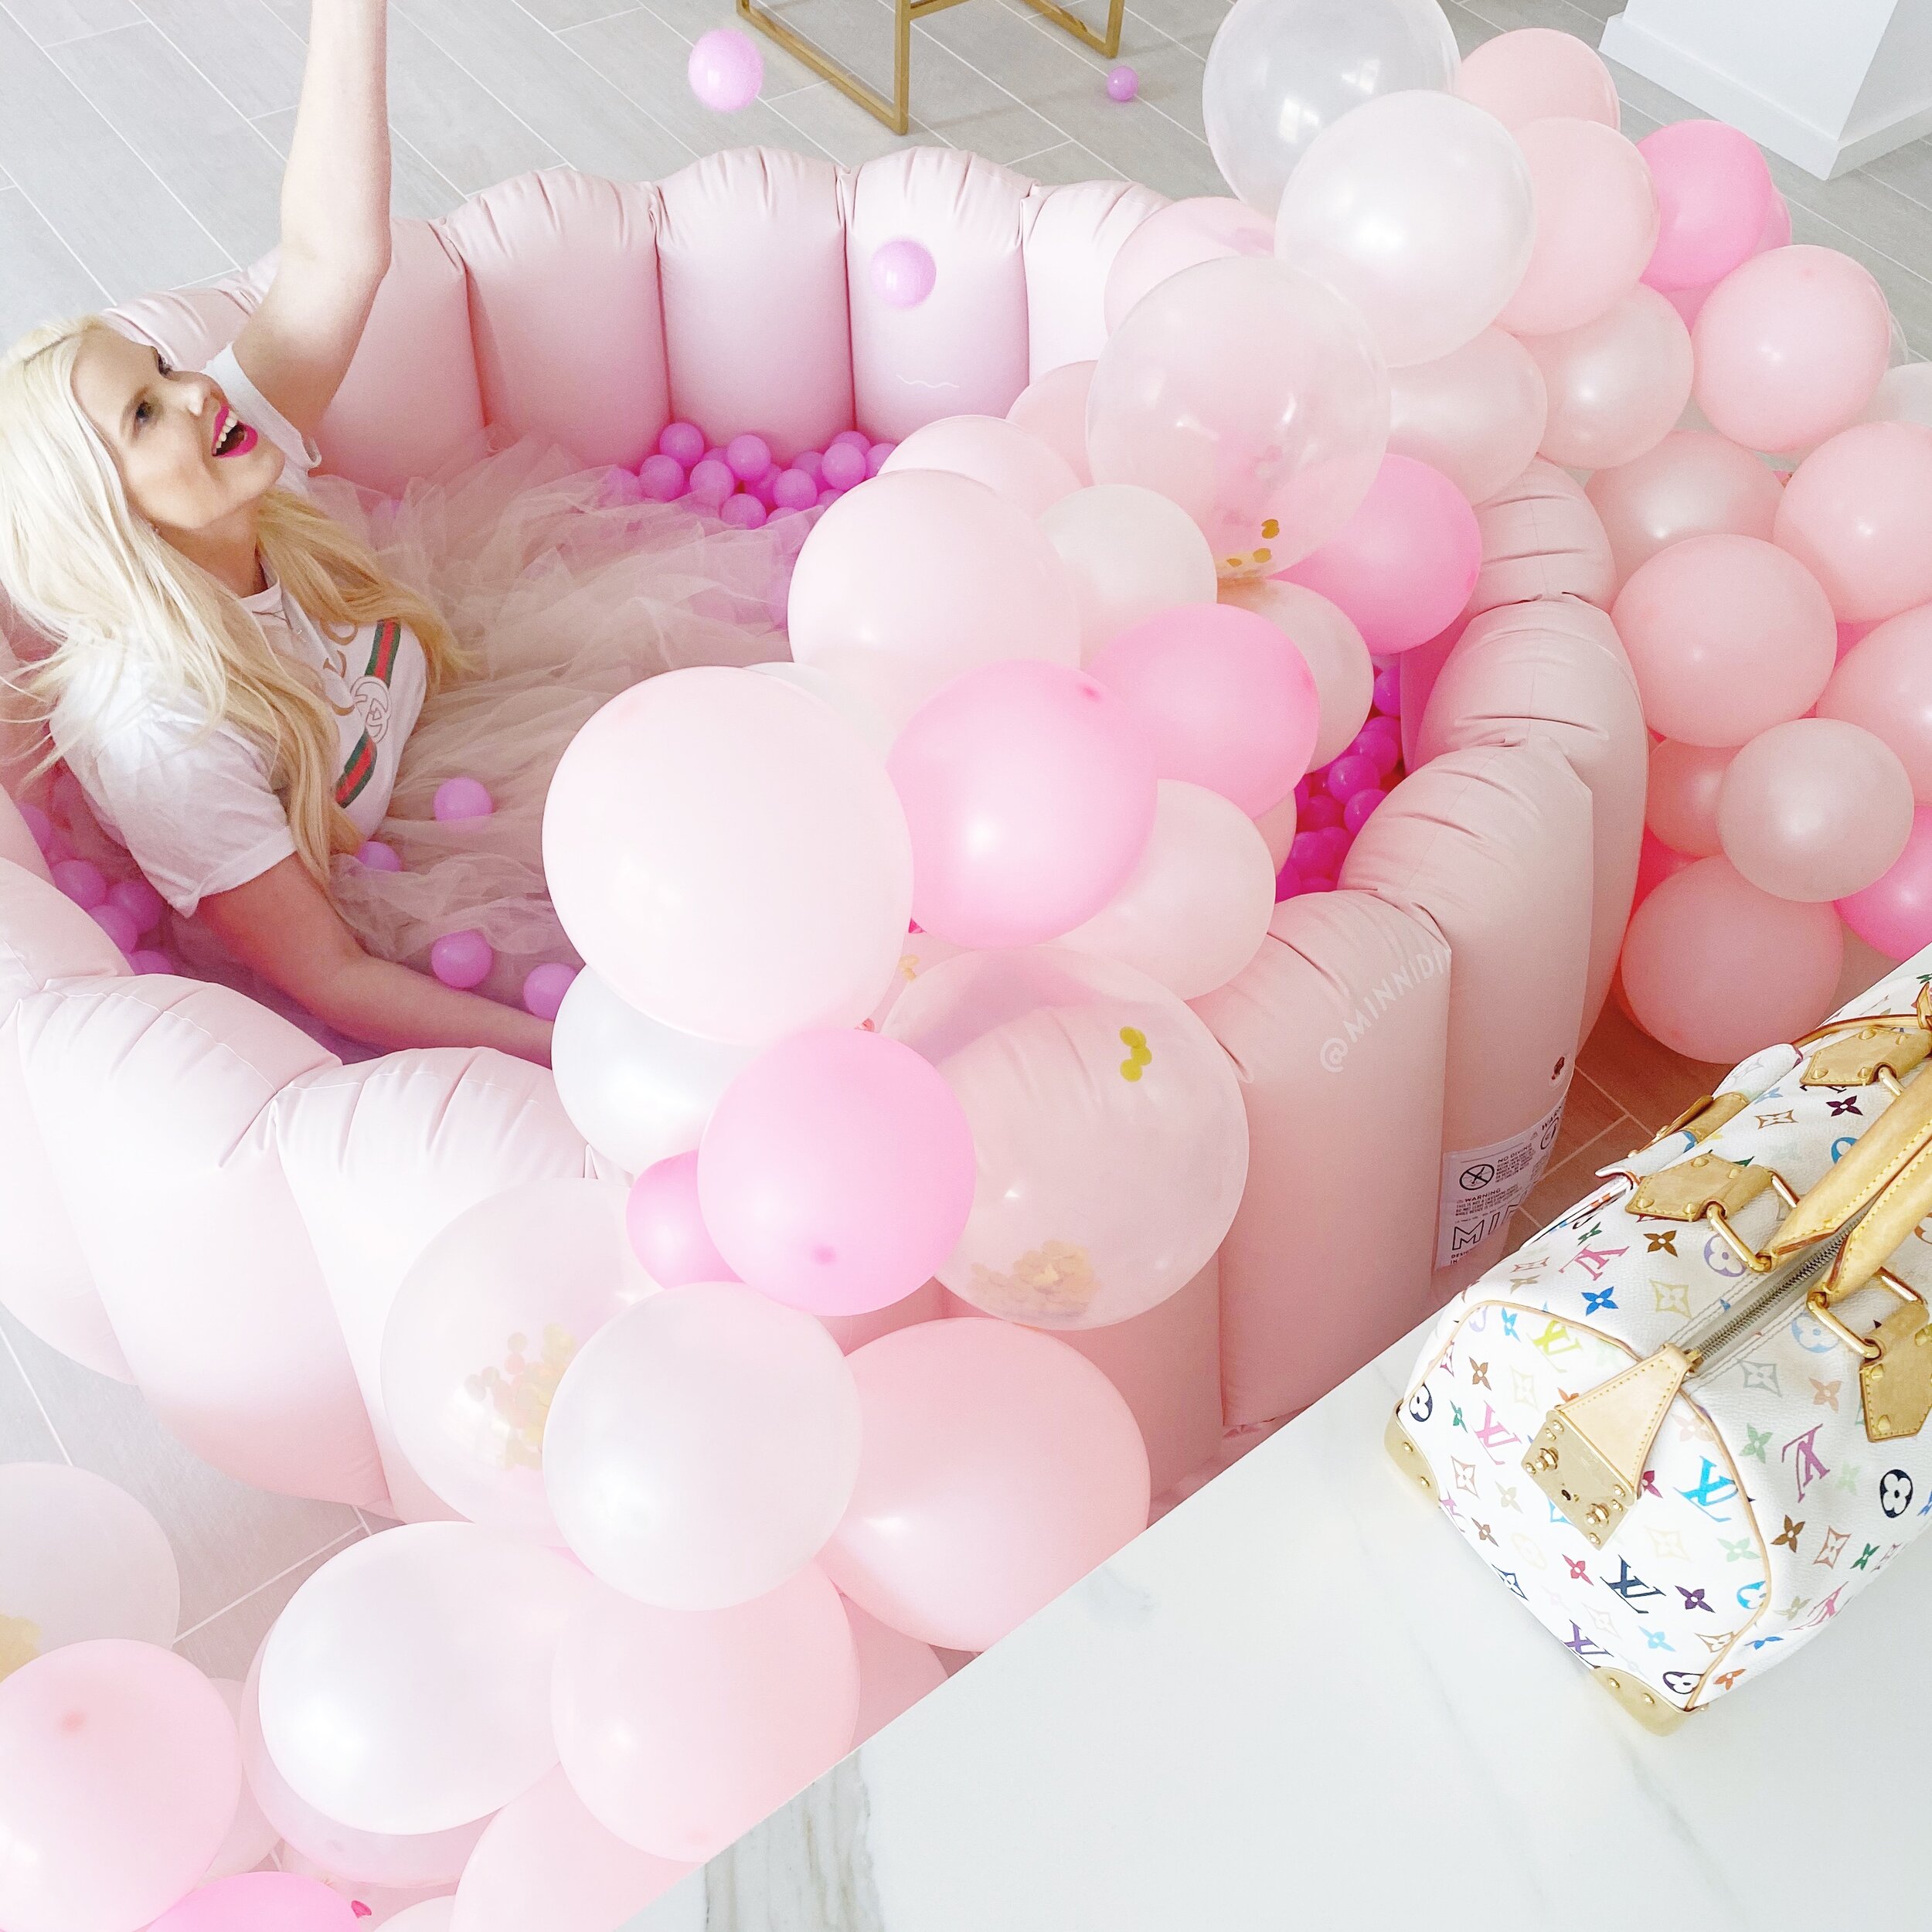 The-Caroline-Doll-Birthday-Pink-Ball-Pit-Minnidip-Inflatable-Pool-Luxury-Office-Goals-Party-Lifestyle-4.JPG